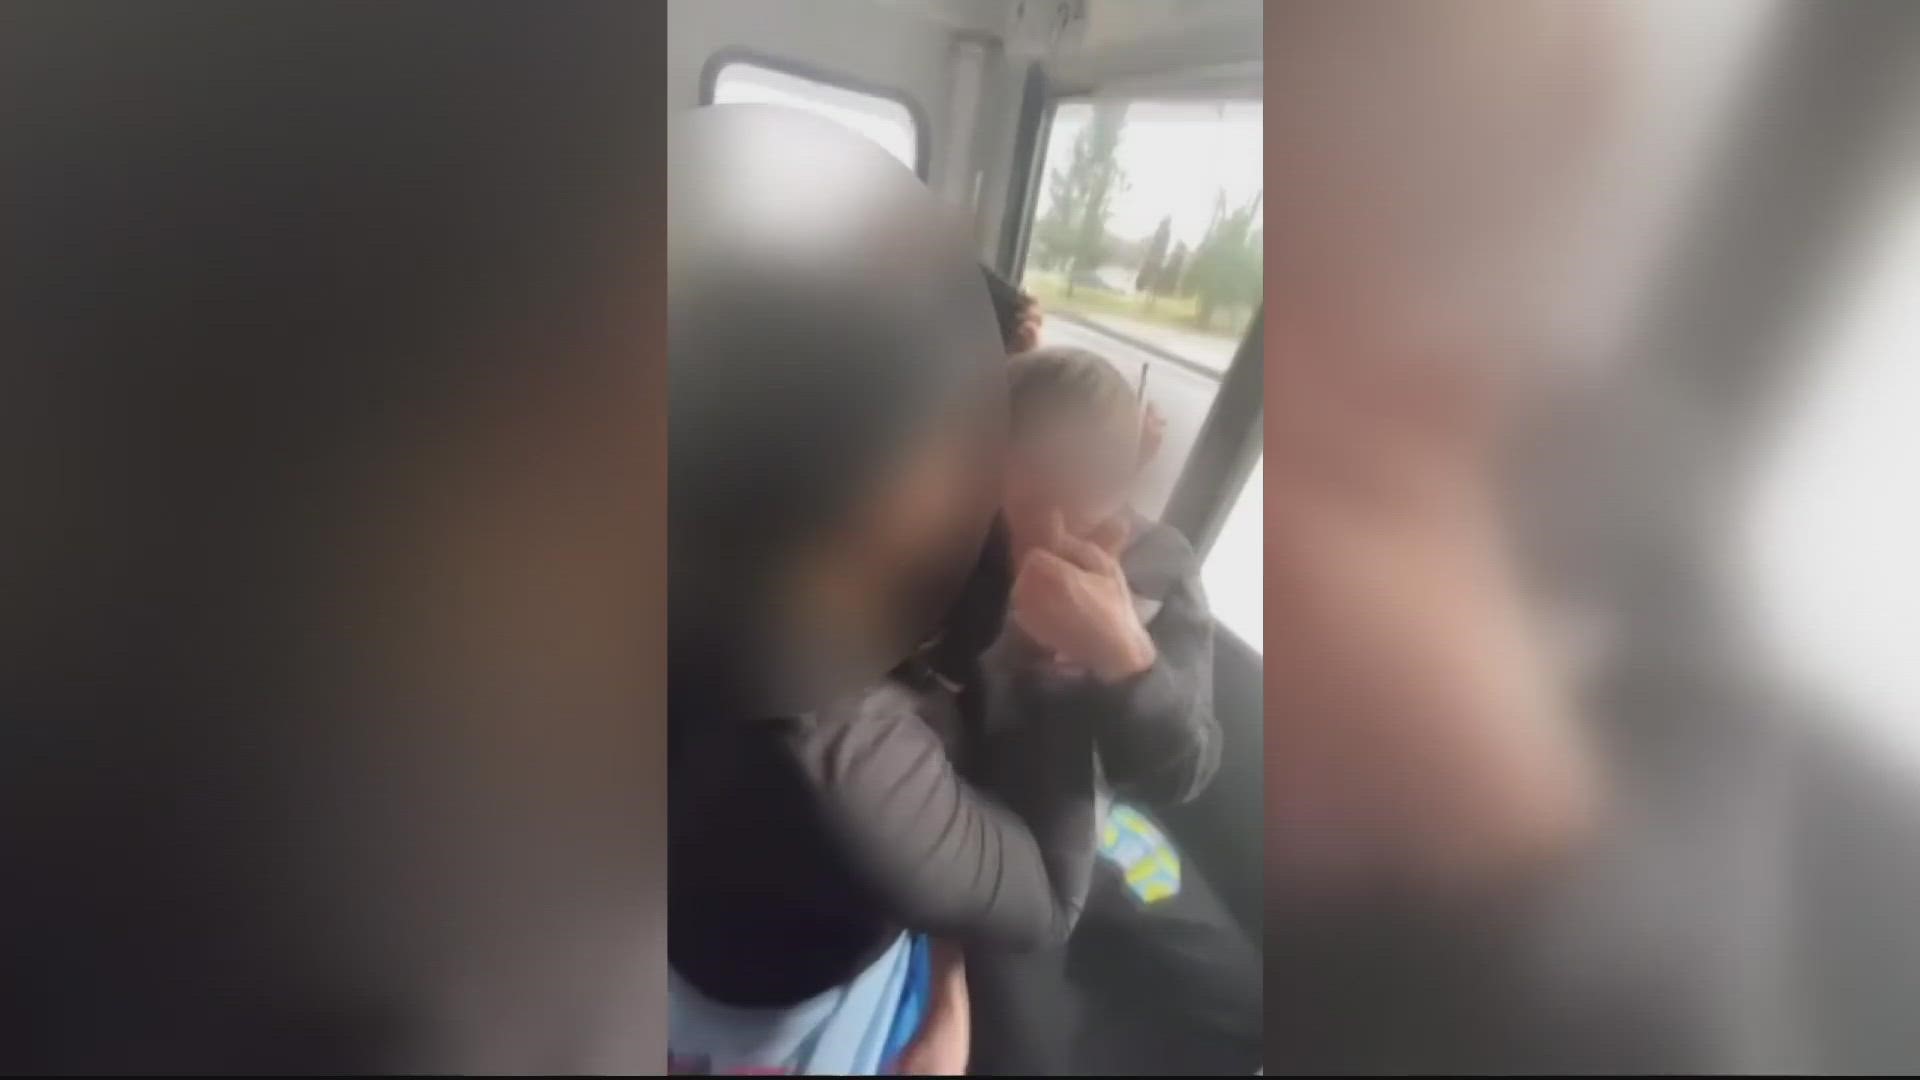 The mother of a 12-year-old boy involved in a violent incident on a school bus is raising more questions about how administrators responded.